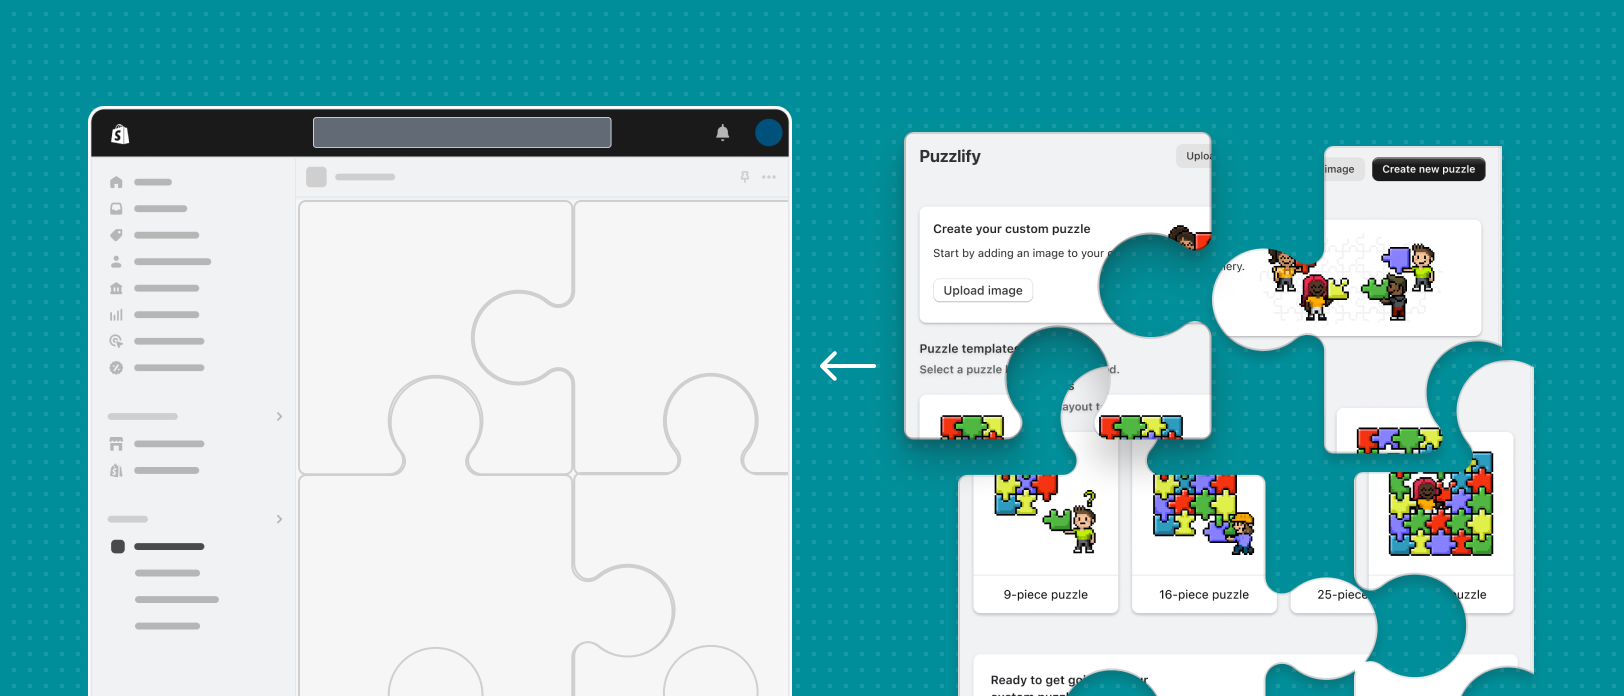 Puzzle pieces being used as a metaphor to show how your app should fit into the Shopify admin.